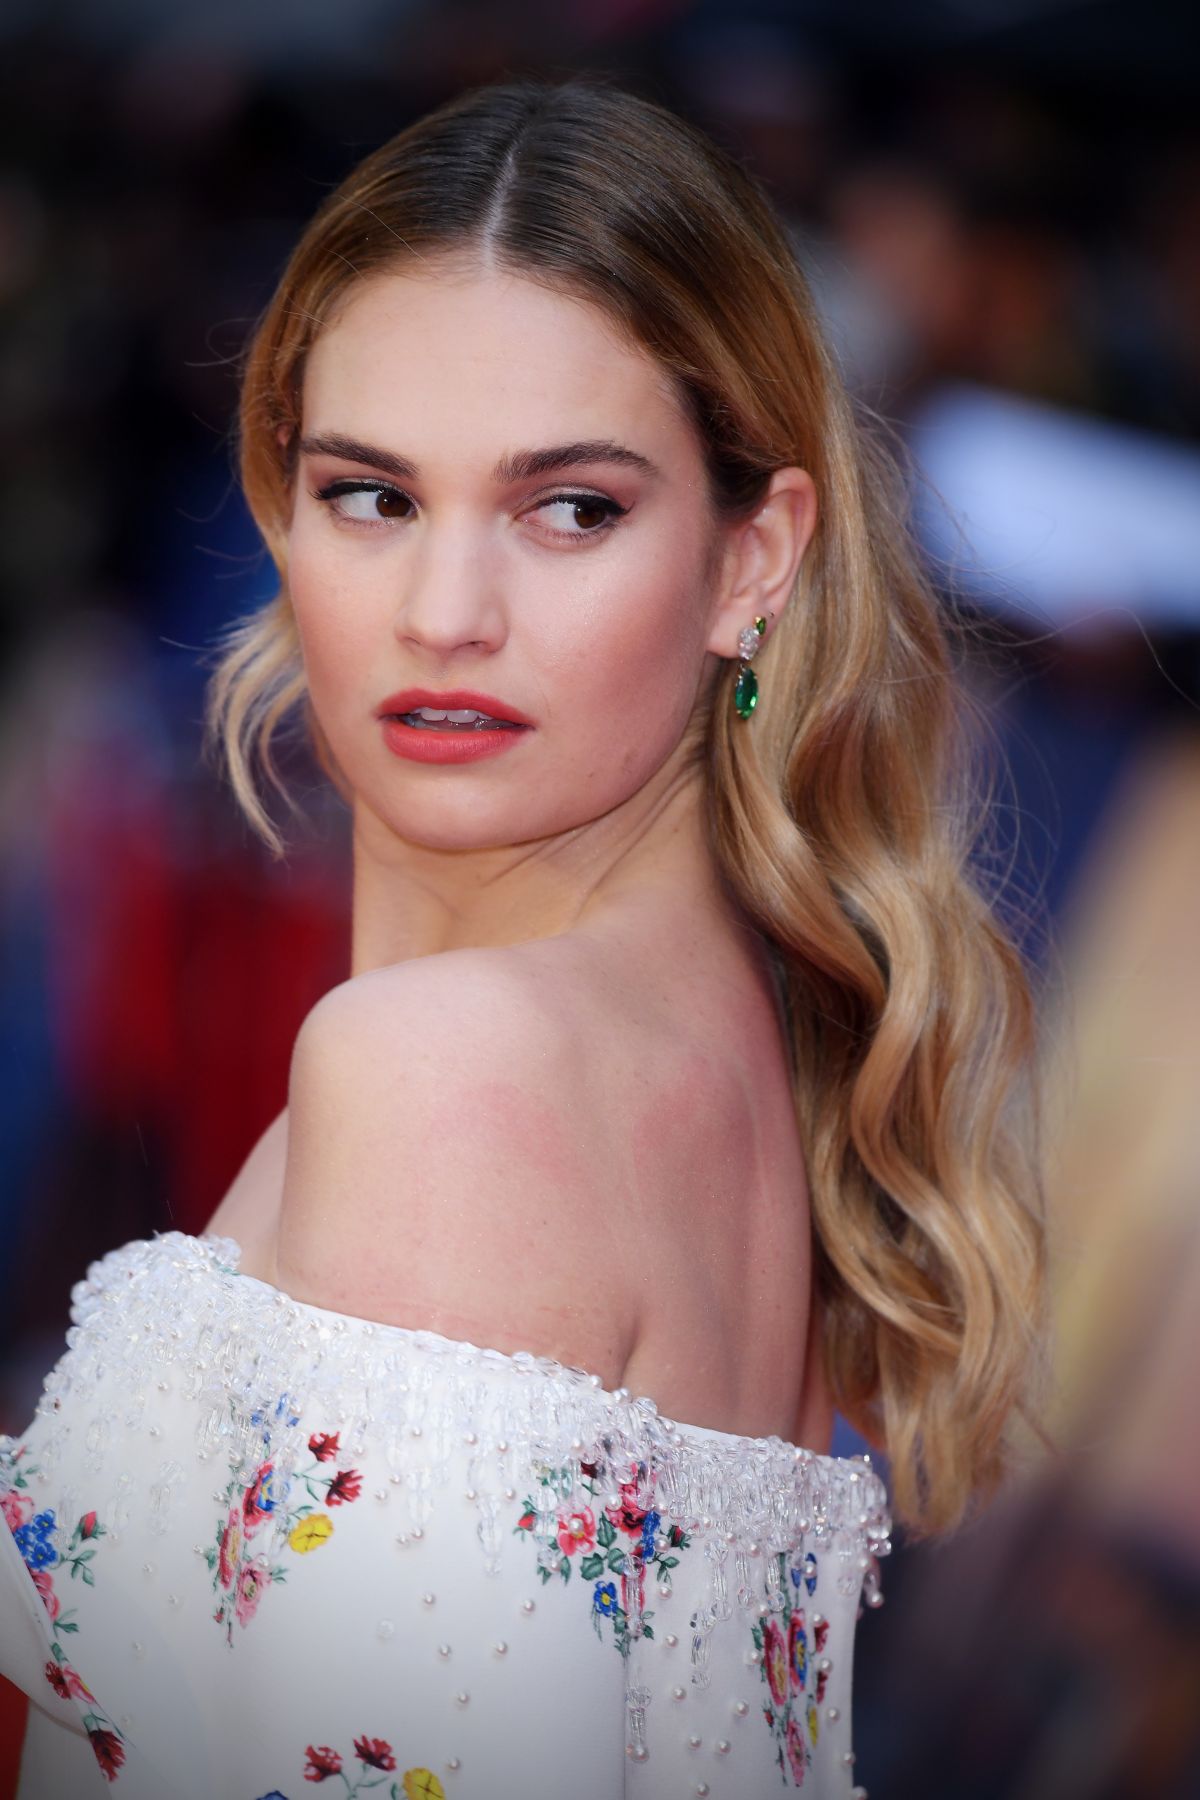 LILY JAMES at The Guernsey Literary and Potato Peel Pie Society ...